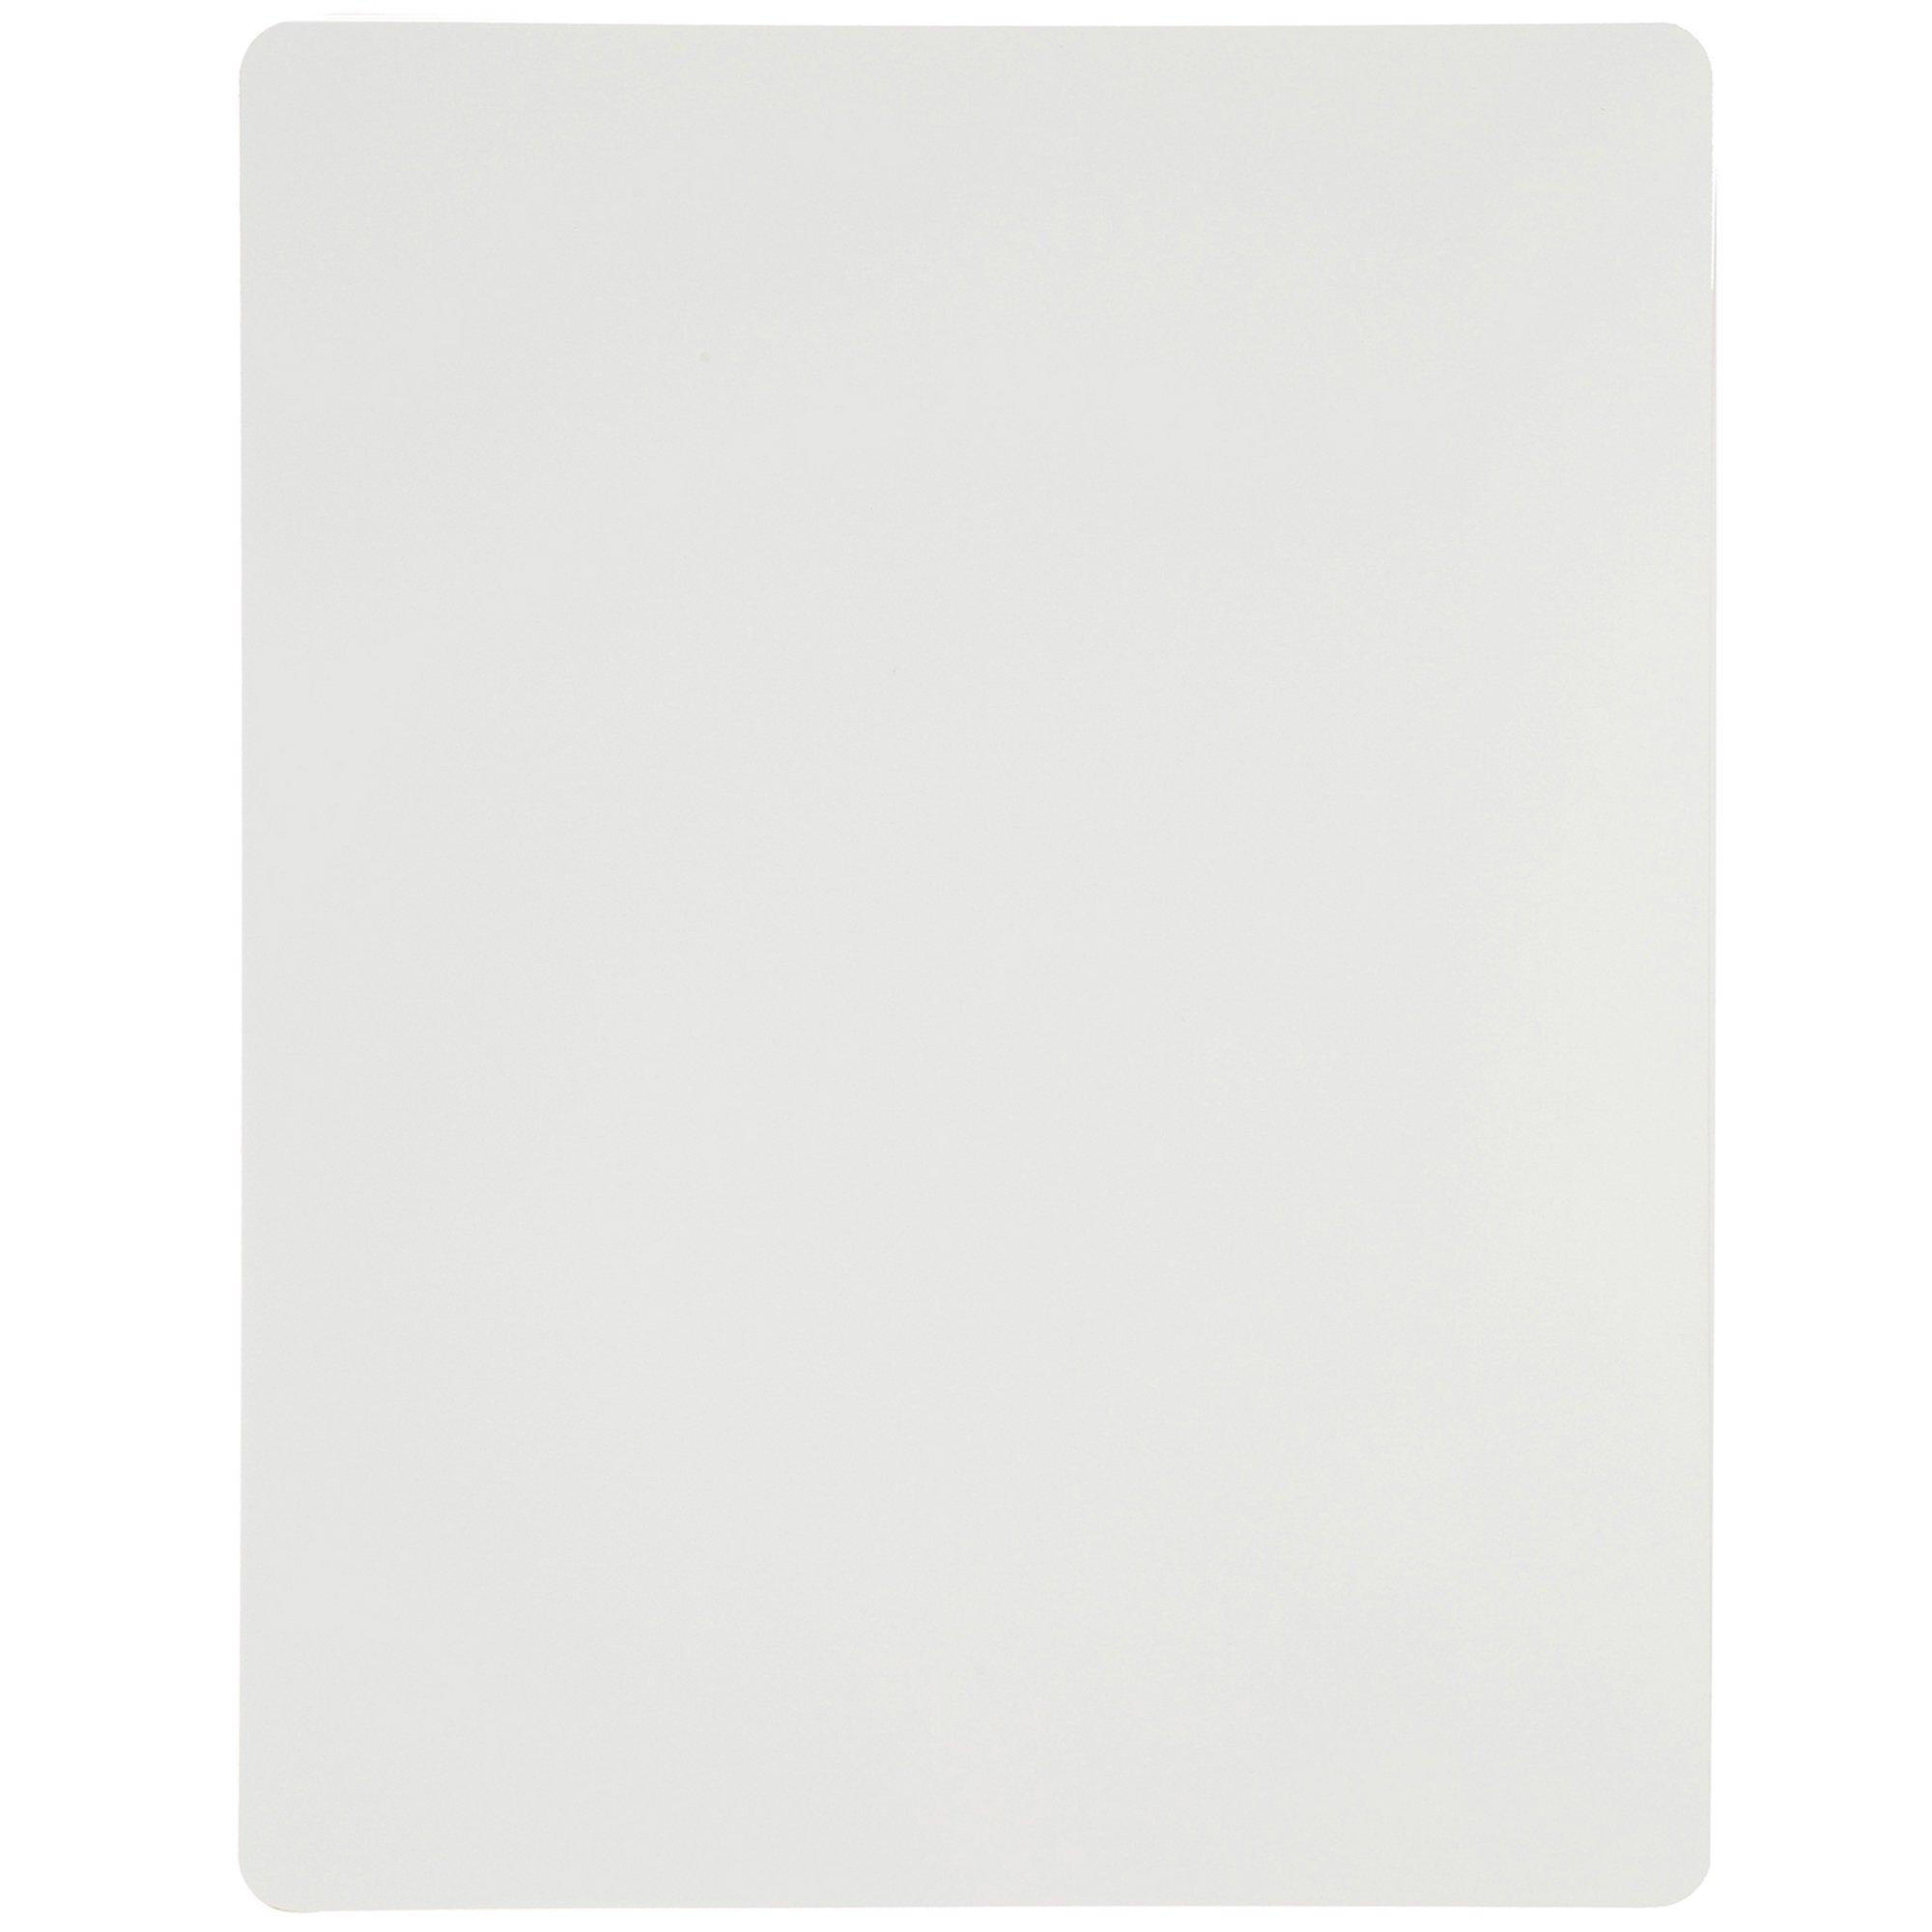 Pacon Dry Erase Poster Board, Hobby Lobby